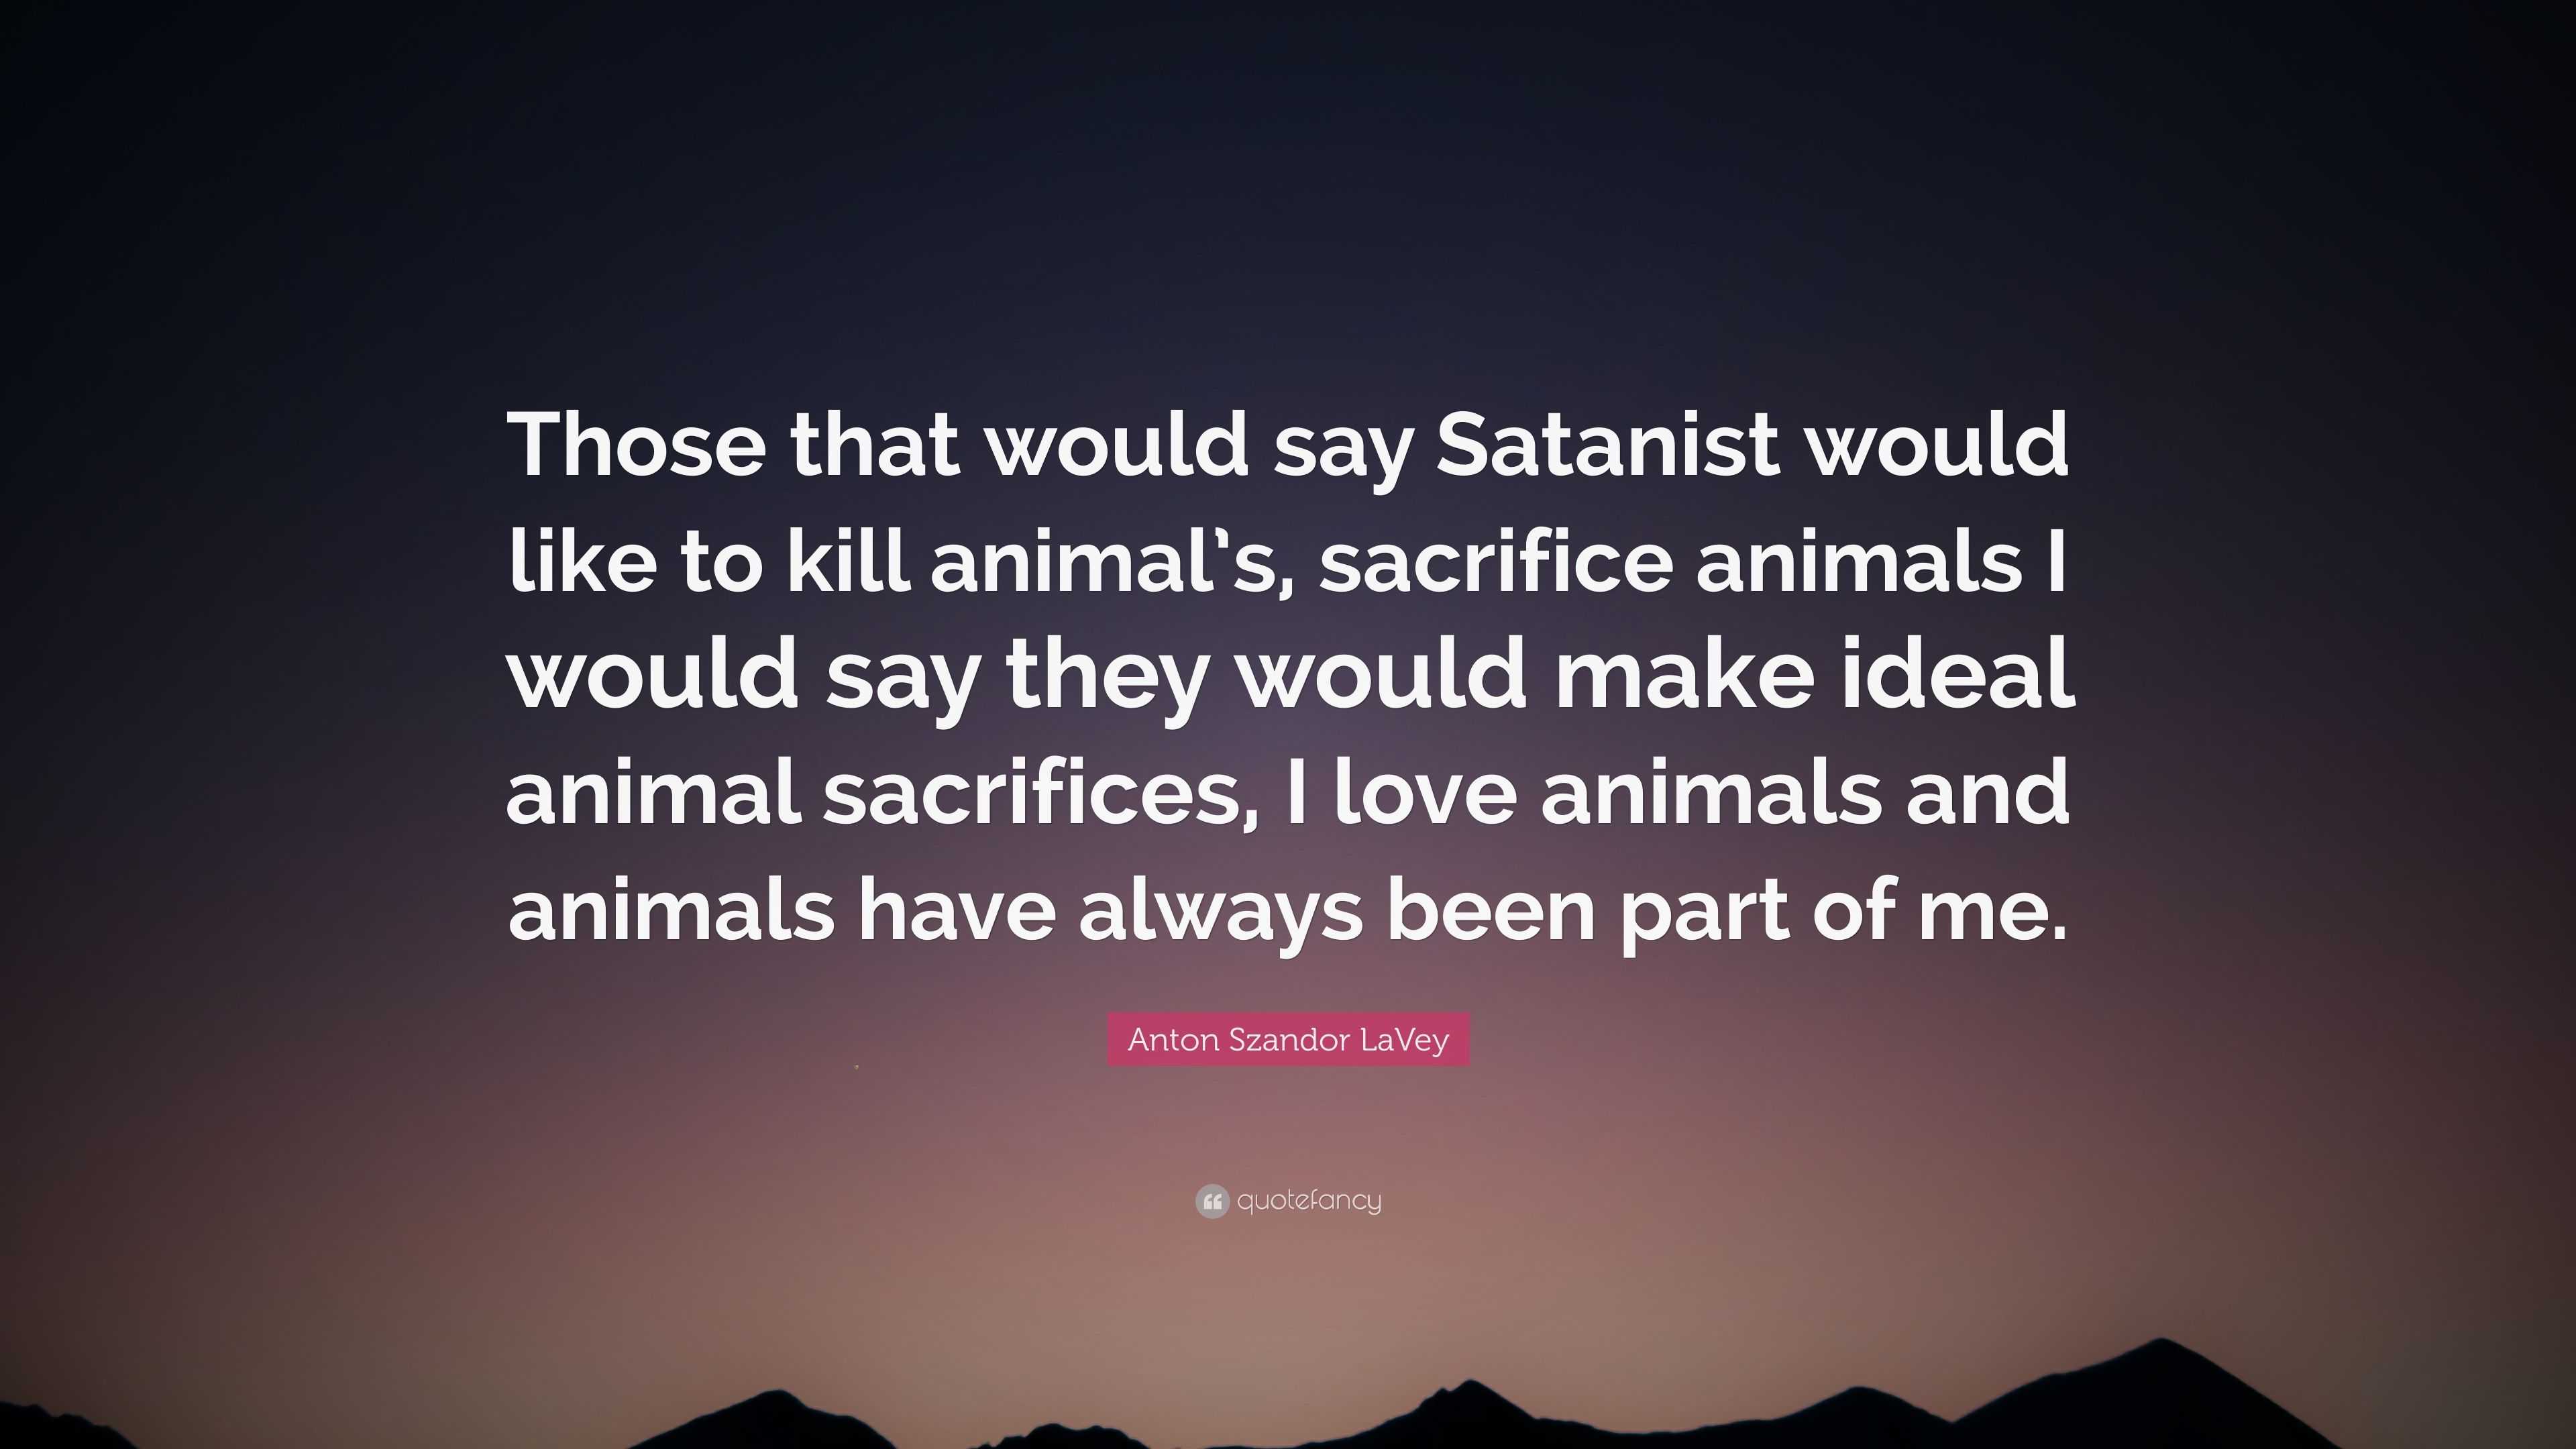 Anton Szandor LaVey Quote: “Those that would say Satanist would like to  kill animal's, sacrifice animals I would say they would make ideal animal  sa...”